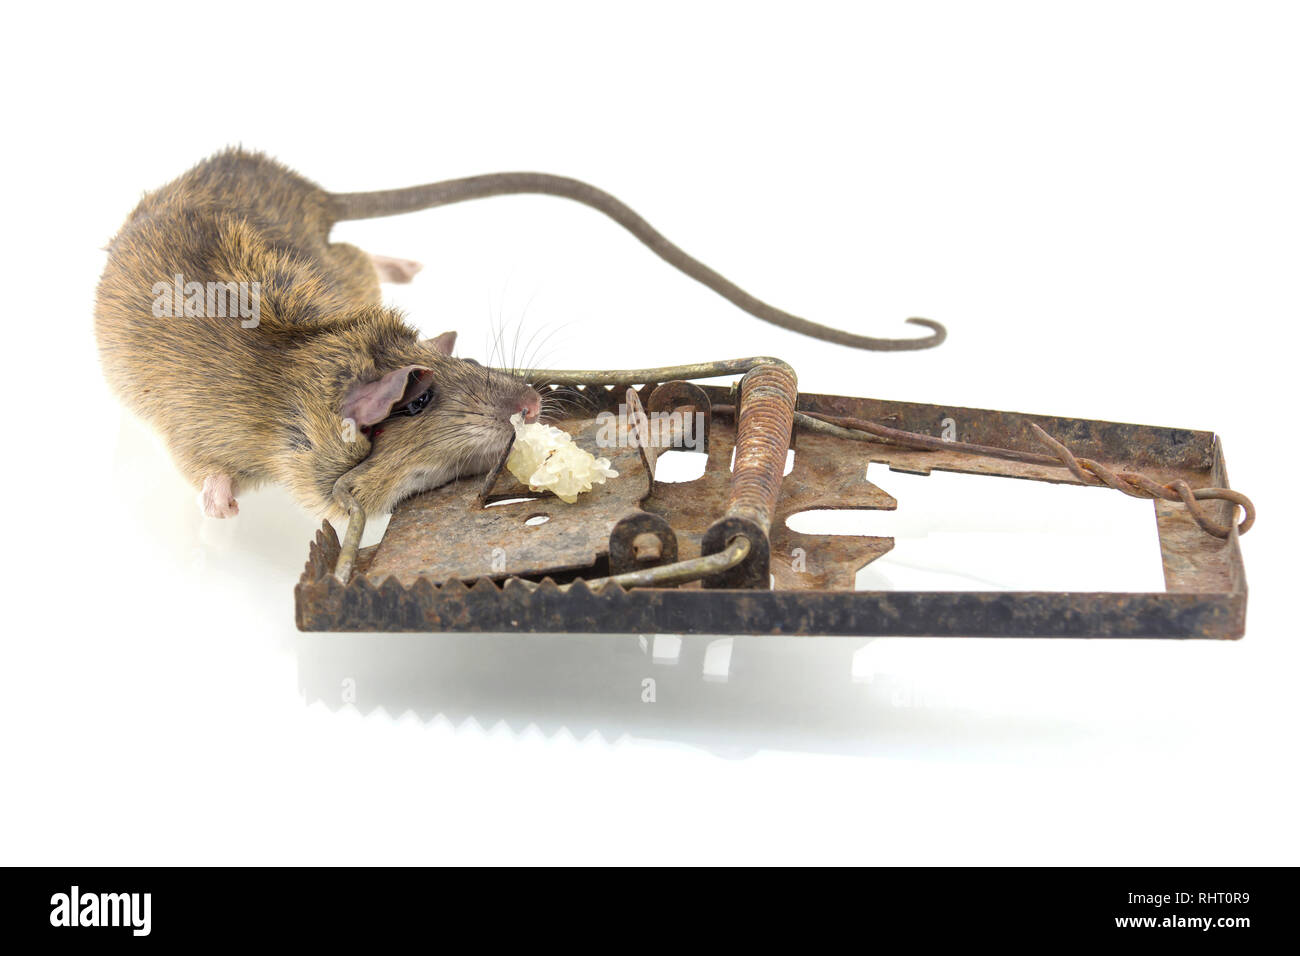 https://c8.alamy.com/comp/RHT0R9/the-mouse-in-a-mousetrap-it-is-isolated-on-a-white-background-RHT0R9.jpg